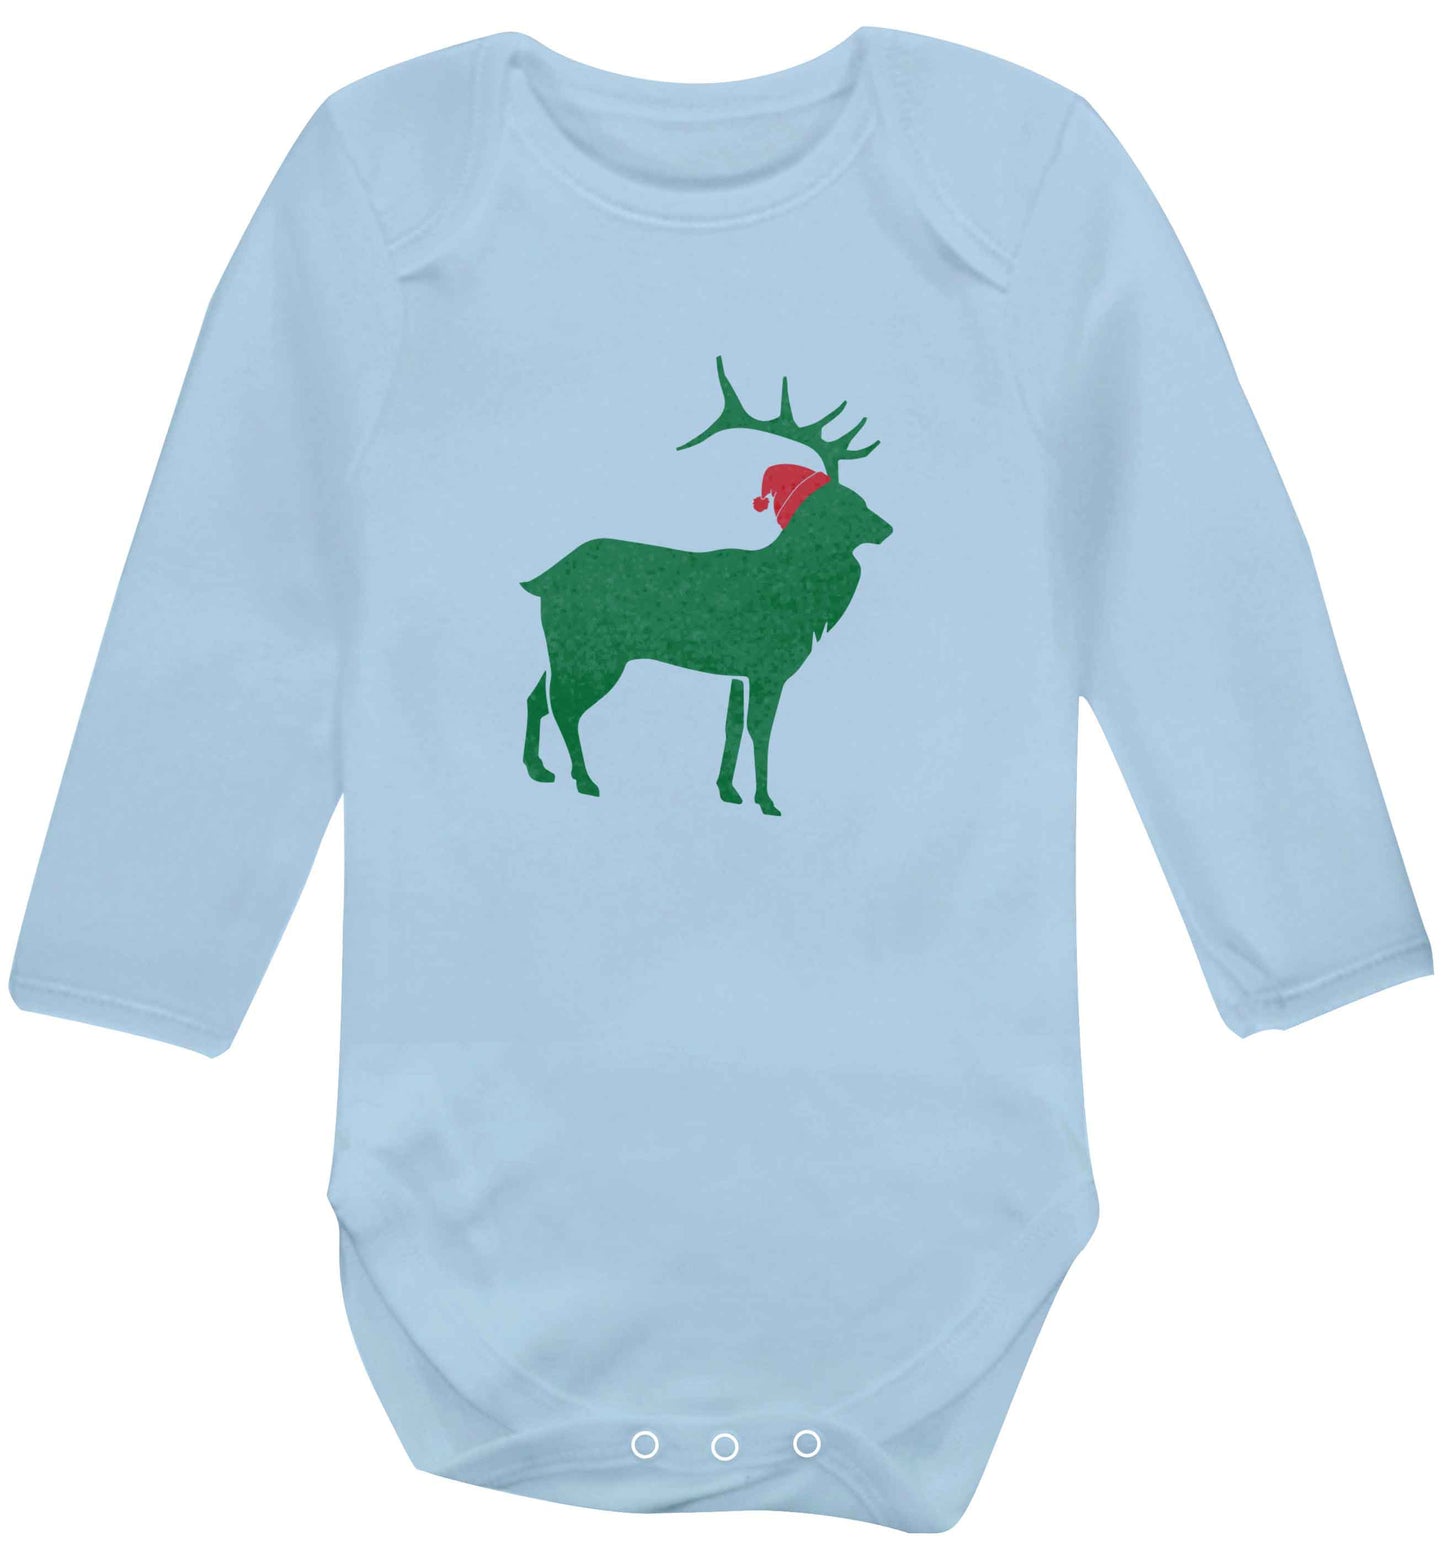 Green stag Santa baby vest long sleeved pale blue 6-12 months